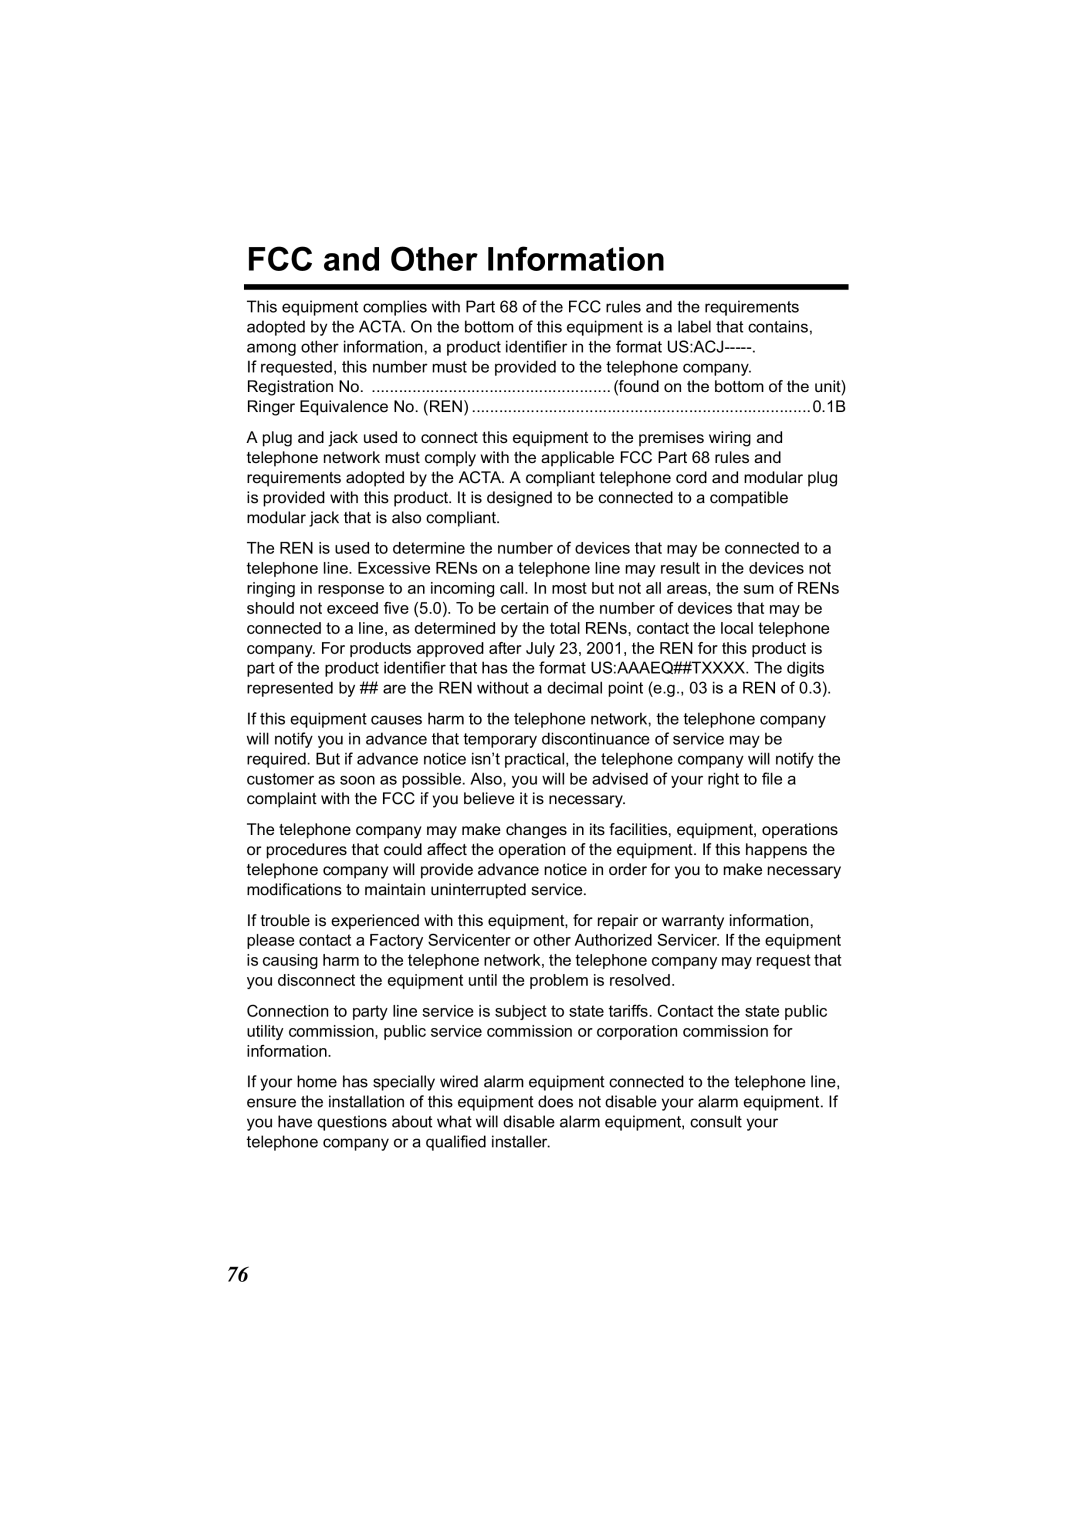 Panasonic KX-TG2344 manual FCC and Other Information 